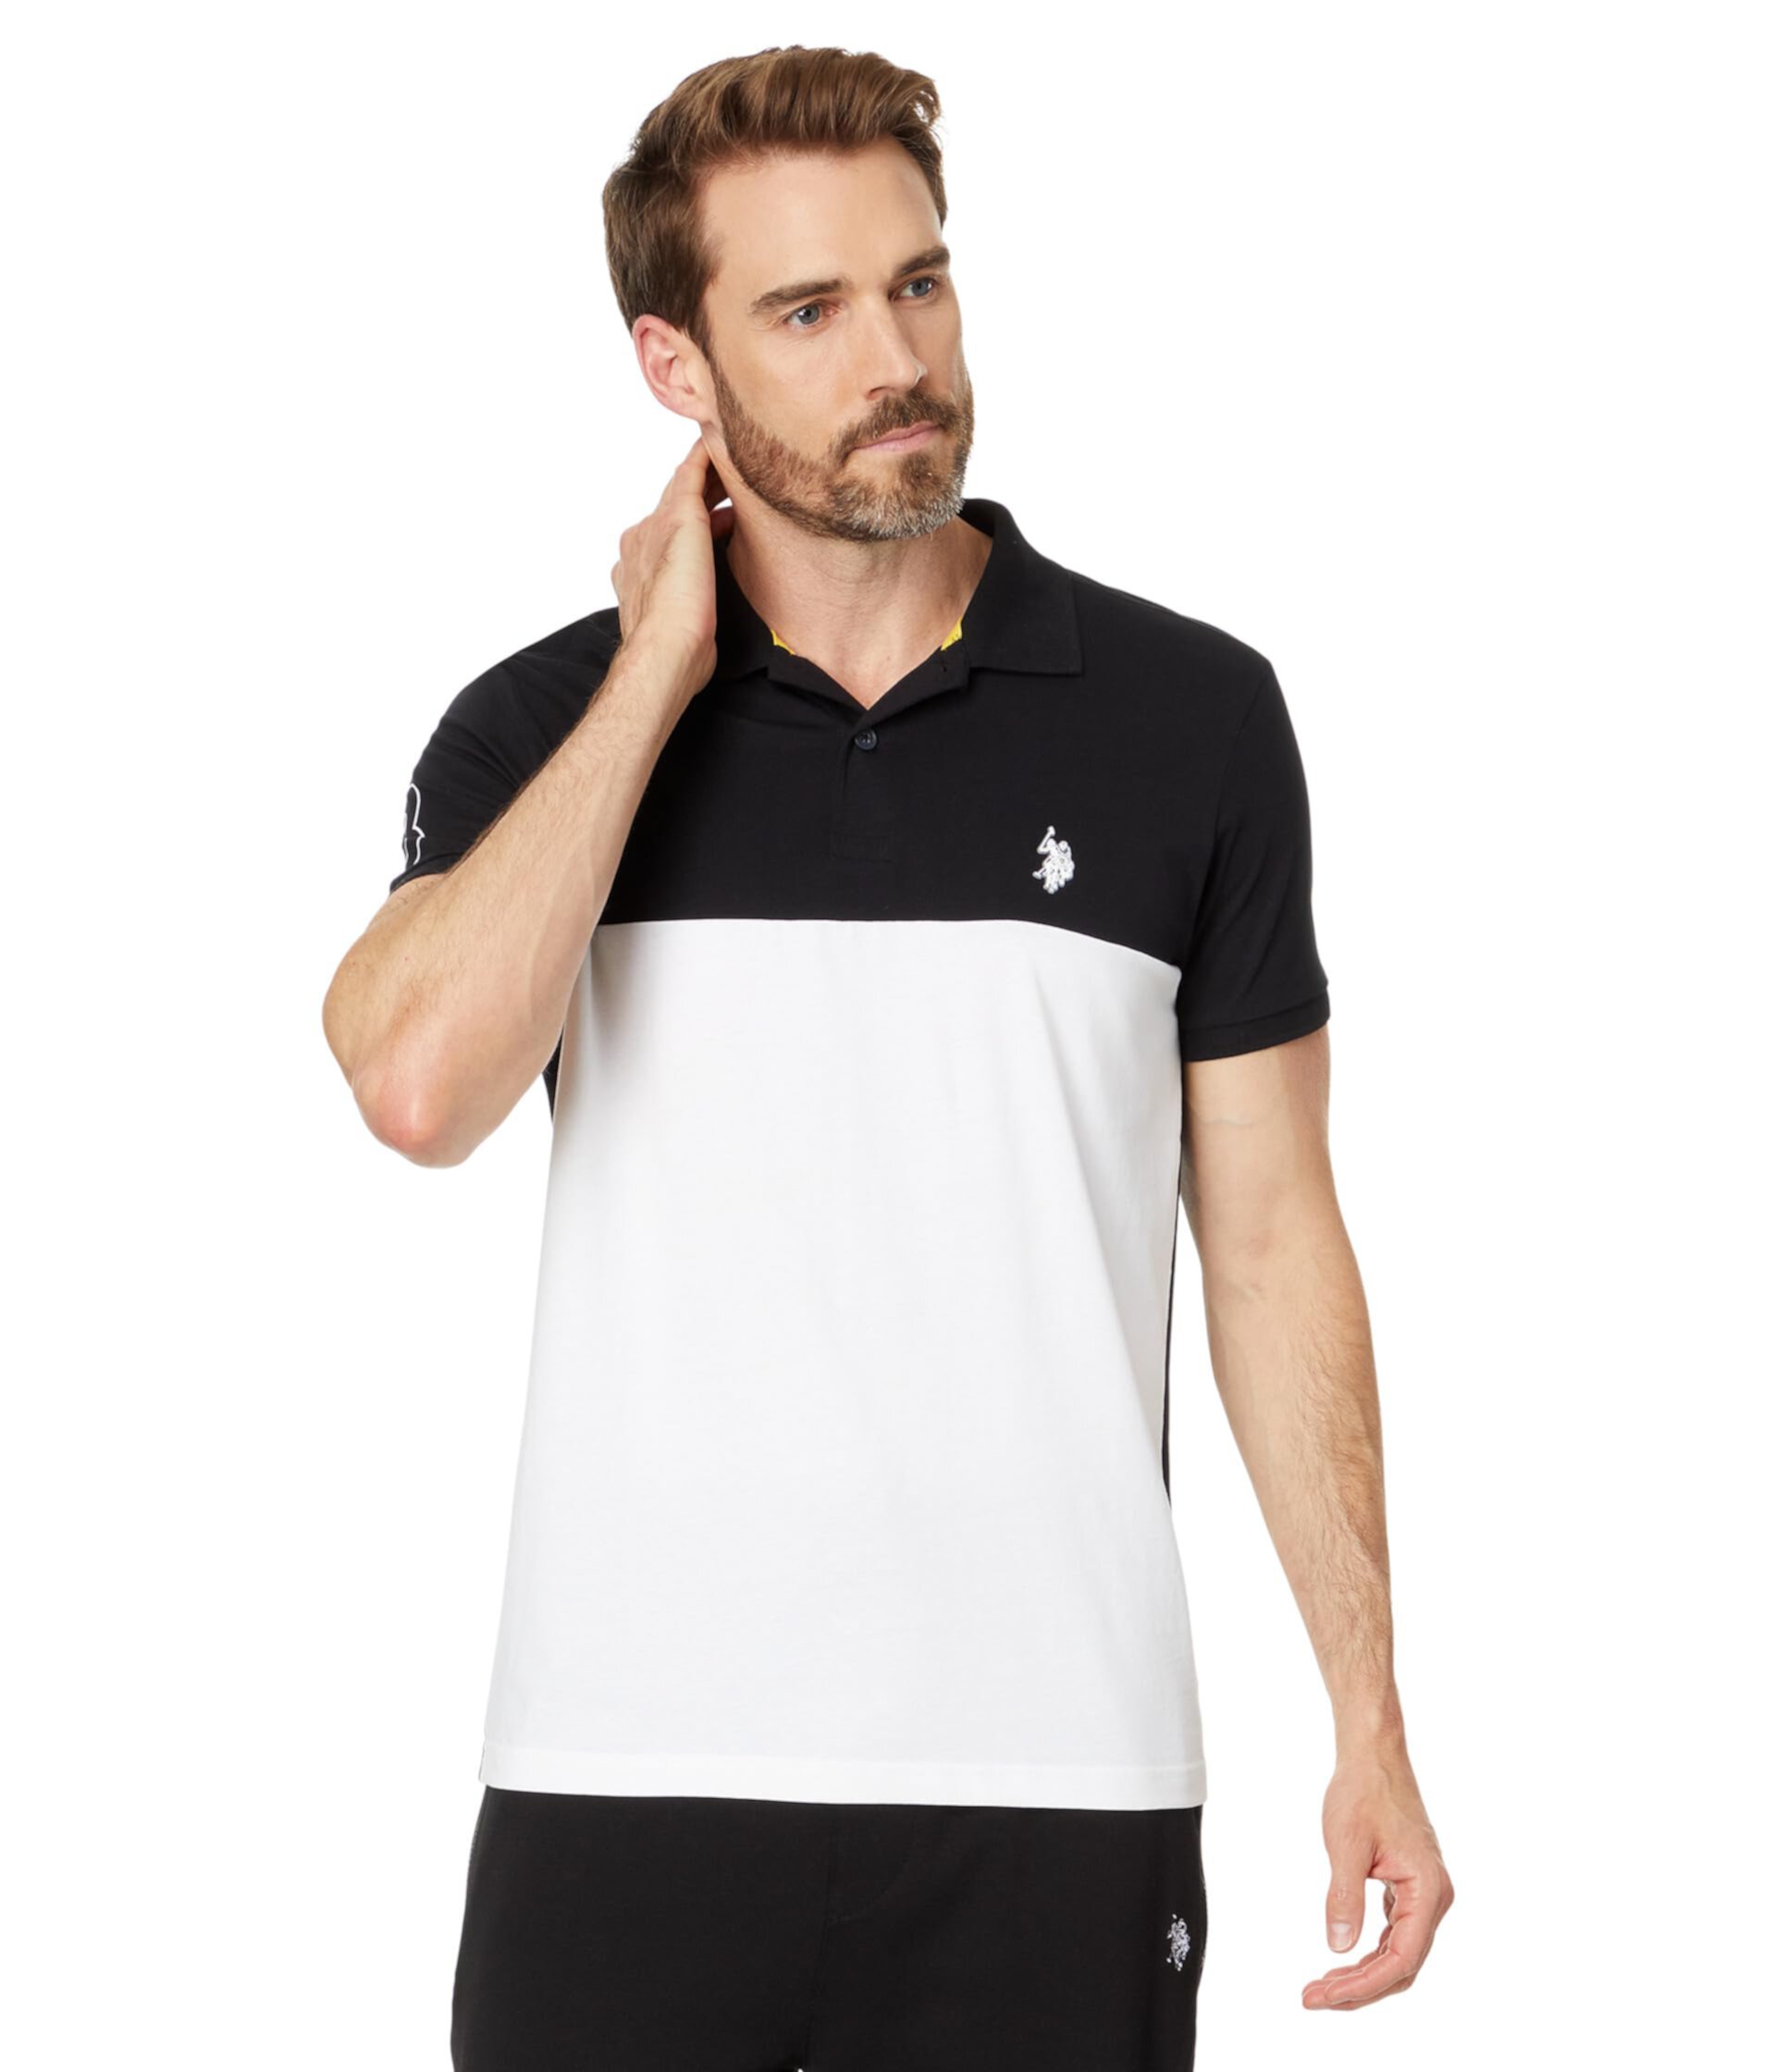 Short Sleeve Slim Fit Colorblock Athletic Jersey Knit Polo Shirt U.S. POLO ASSN.